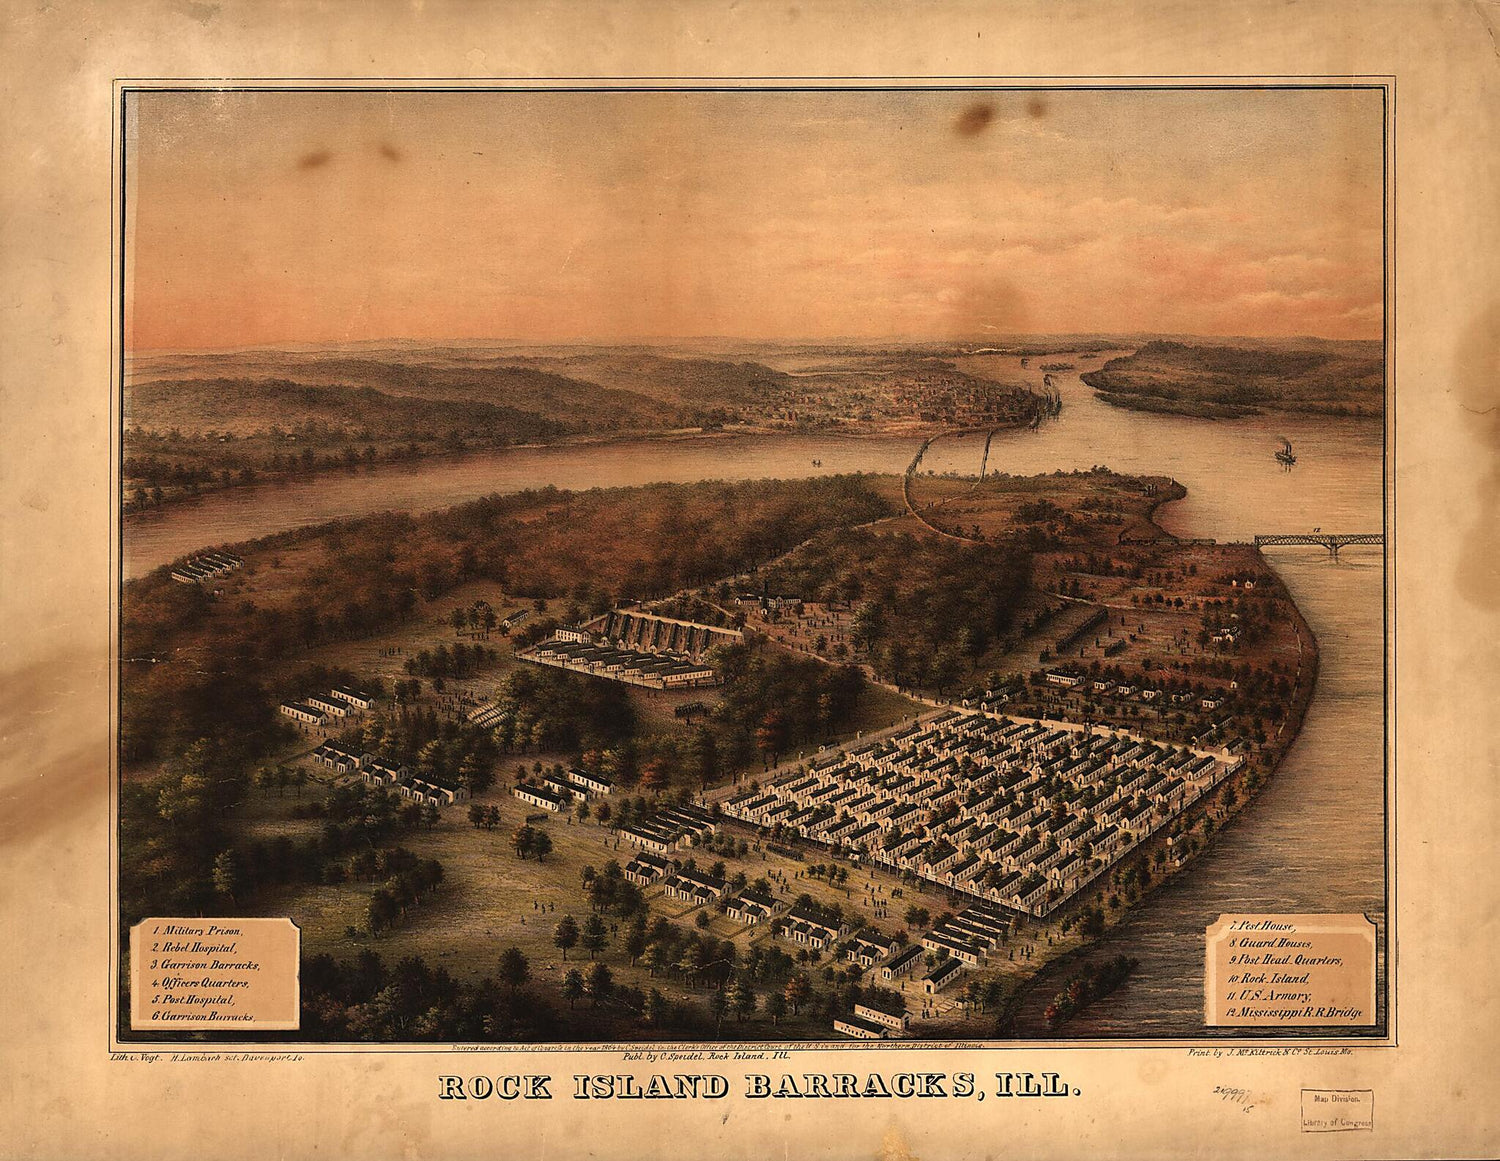 This old map of Rock Island Barracks, Ill from 1864 was created by C. Speidel in 1864